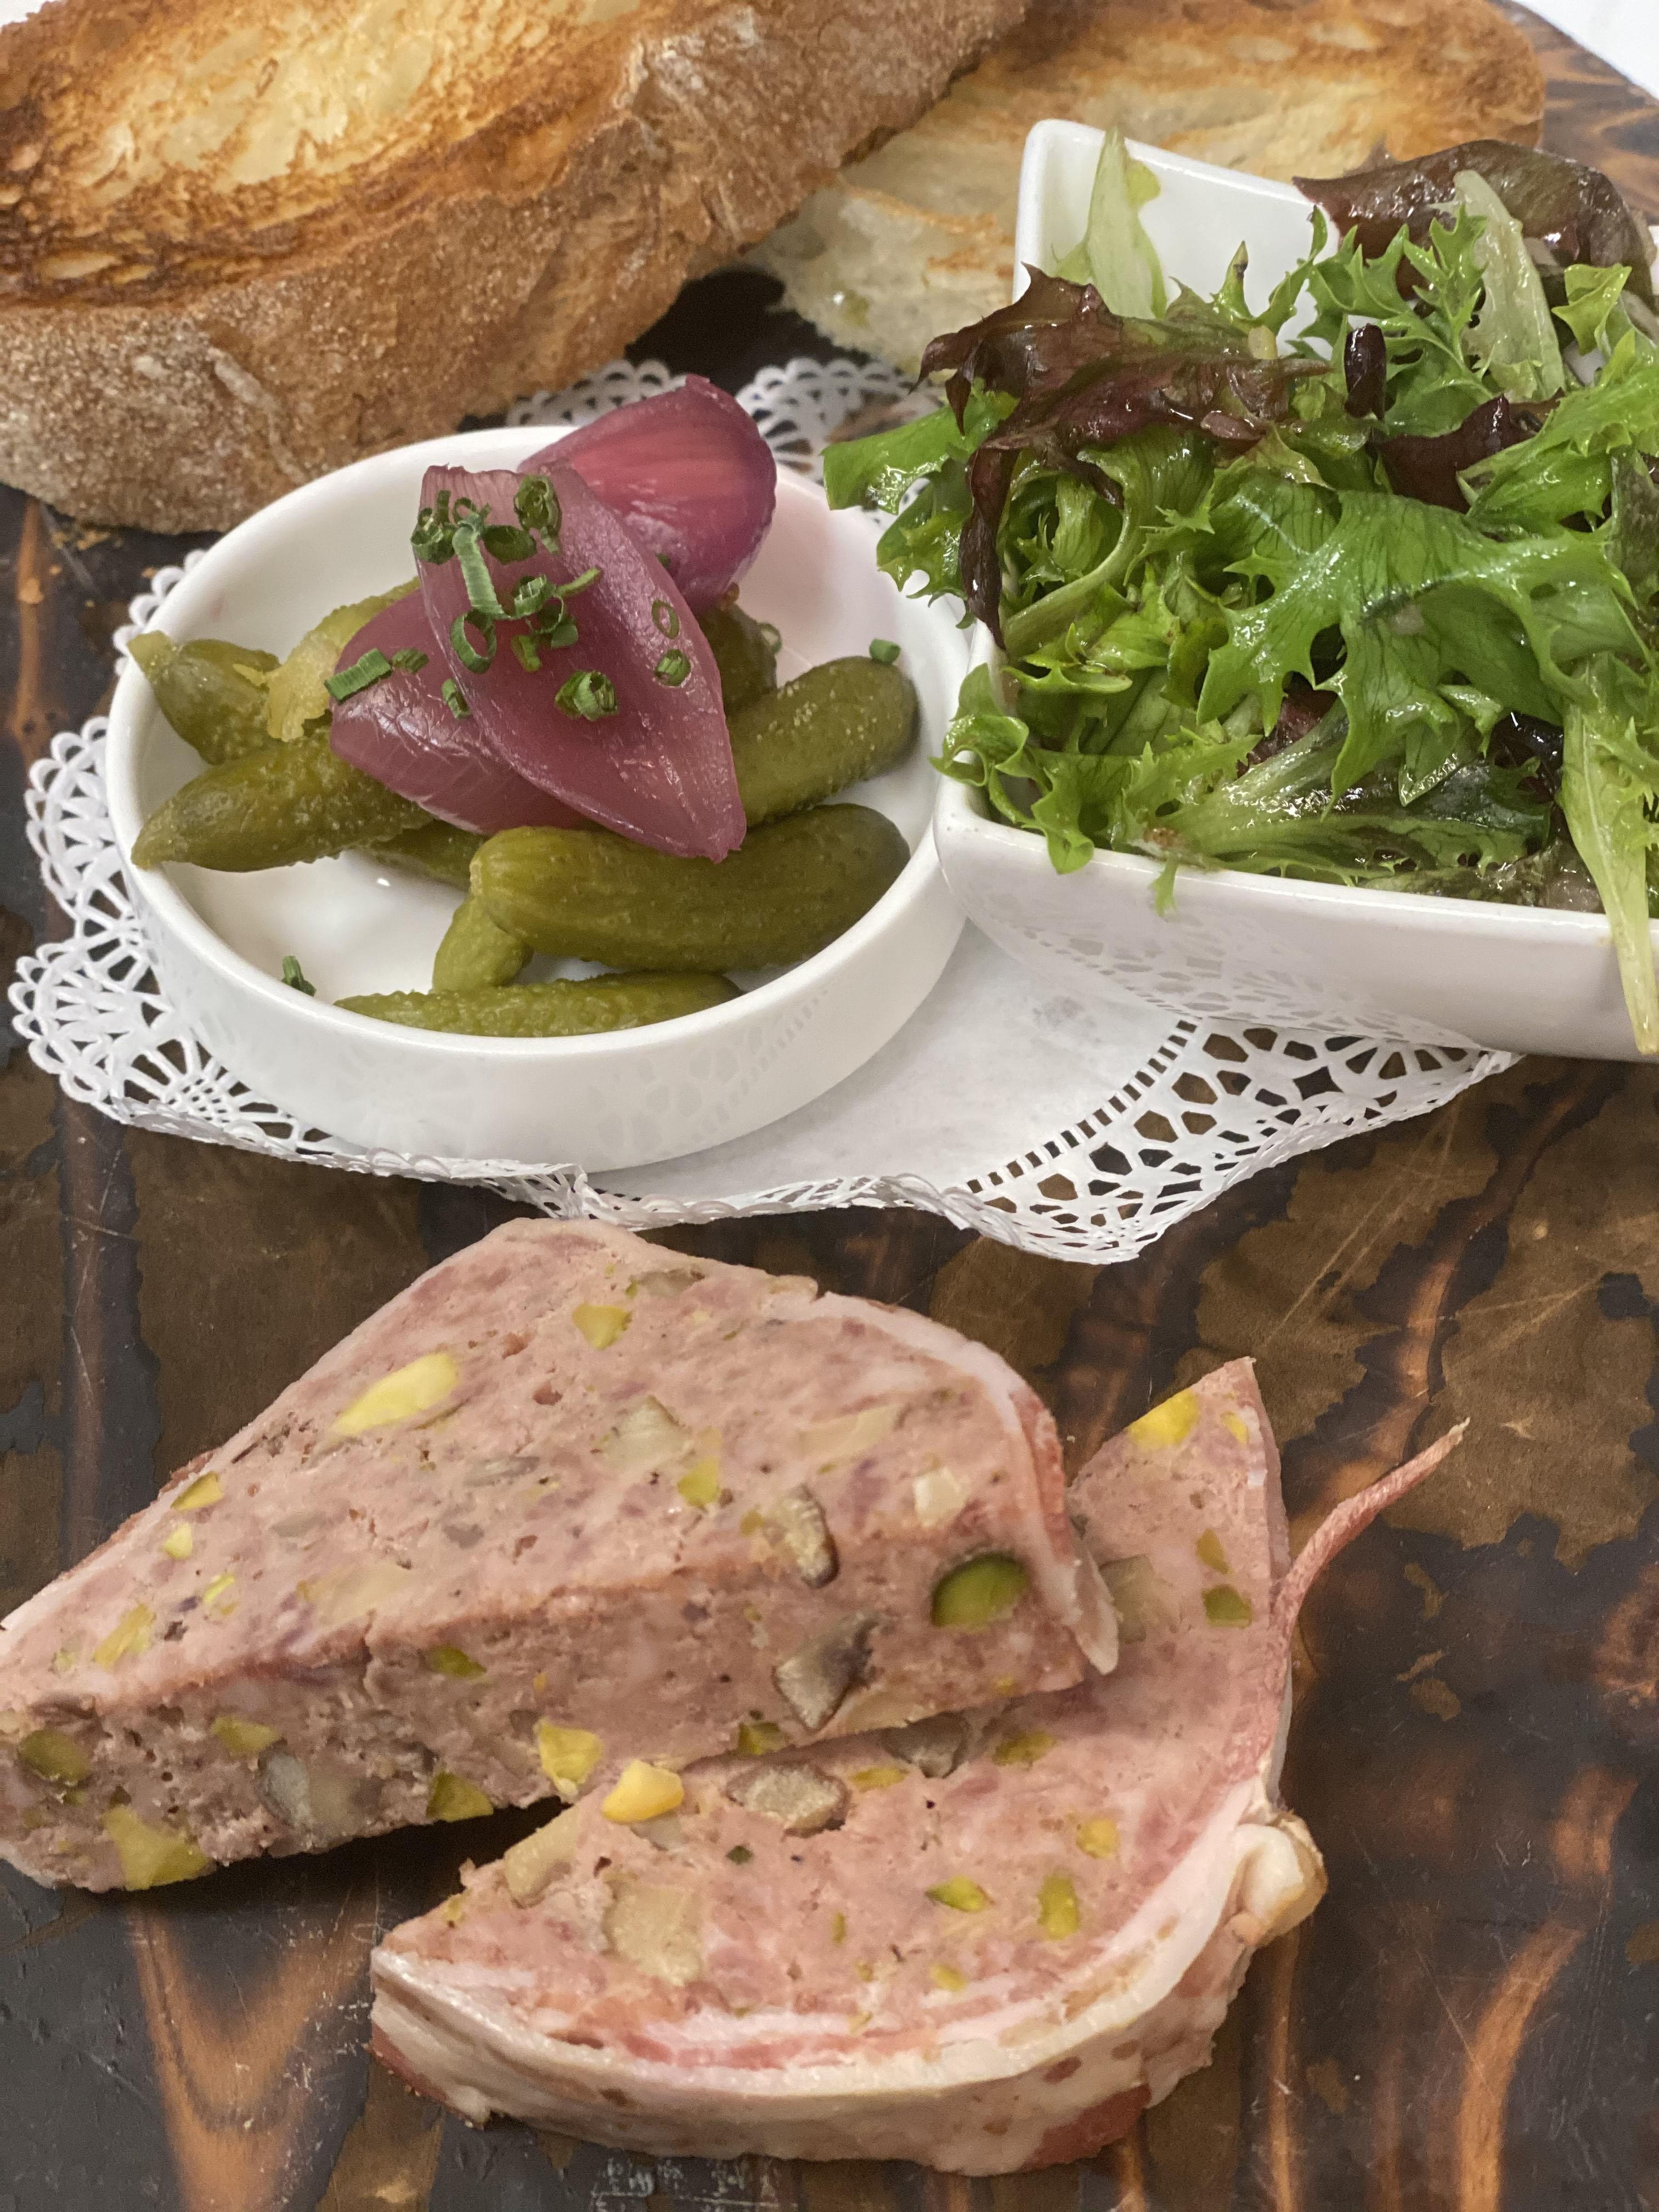 COUNTRY PATE